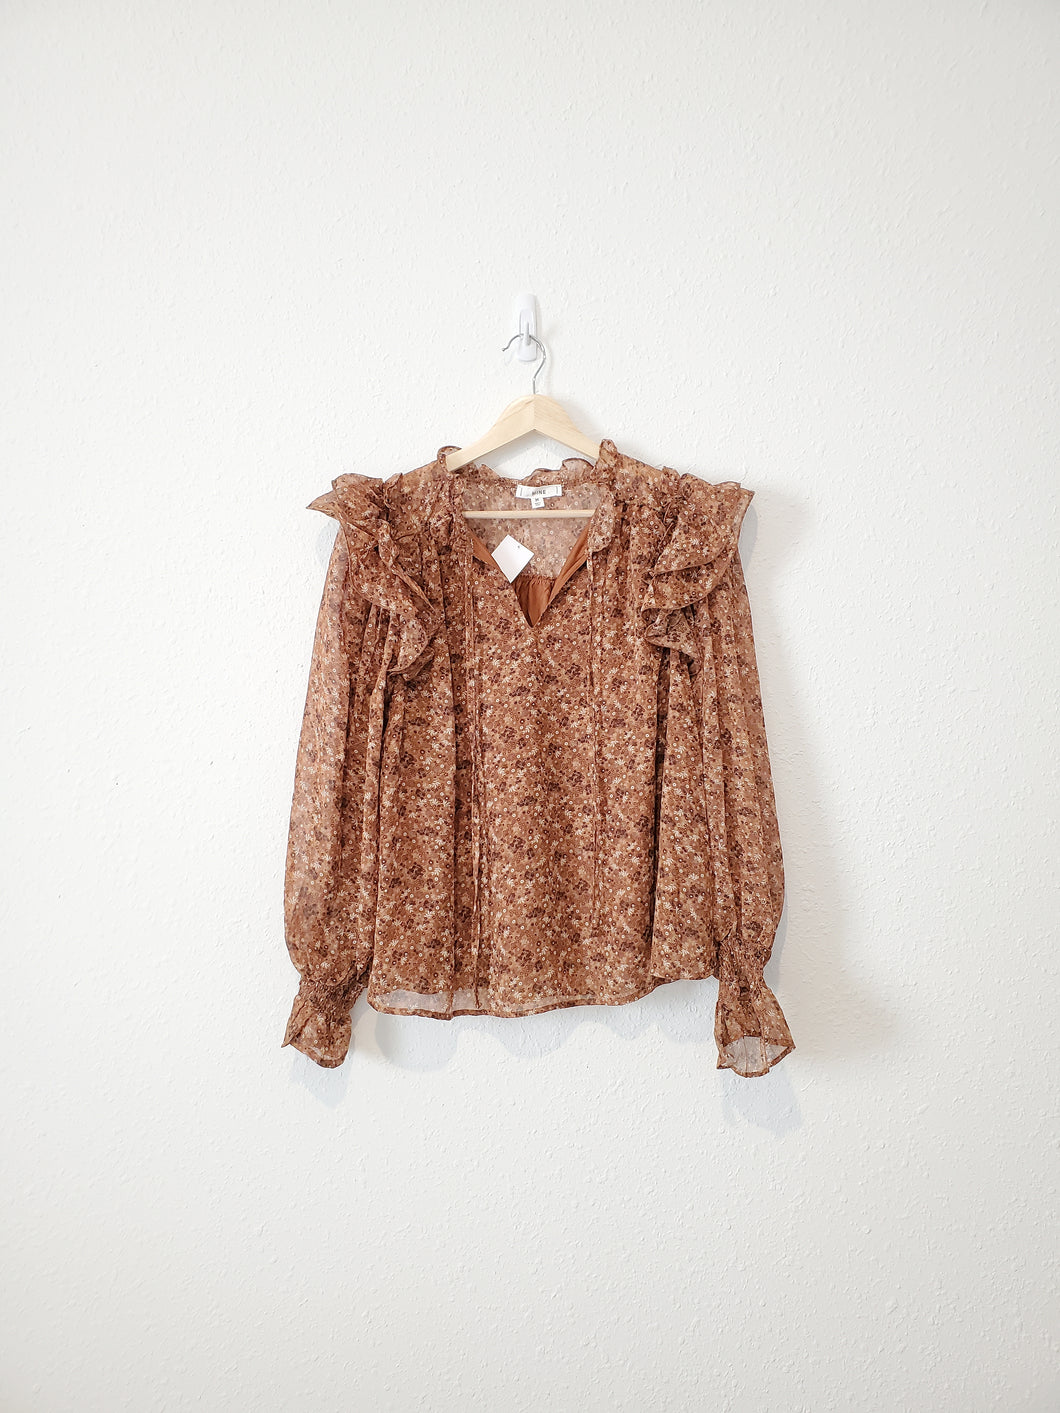 NEW Floral Puff Sleeve Top (M)